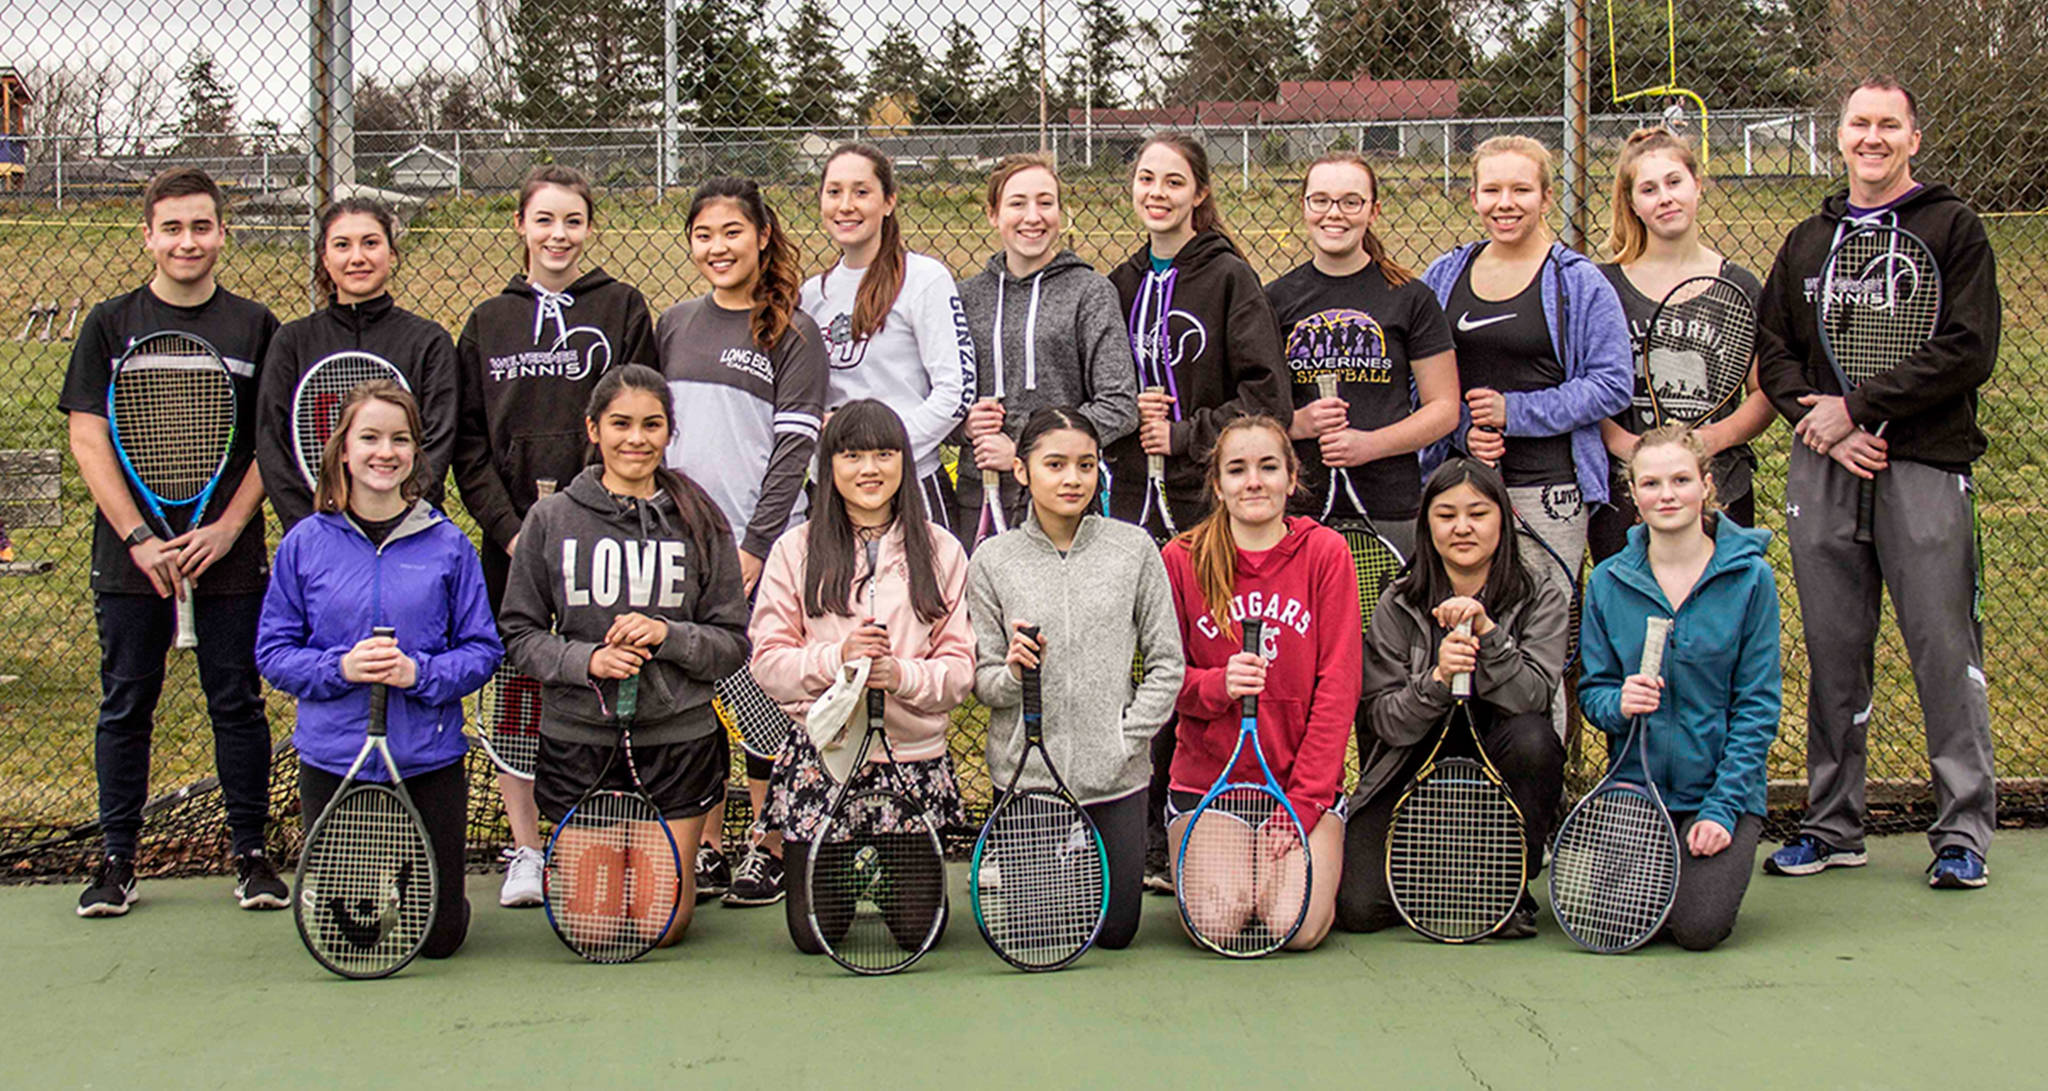 Friday Harbor girls tennis to have ‘ace’ season | Spring sports preview